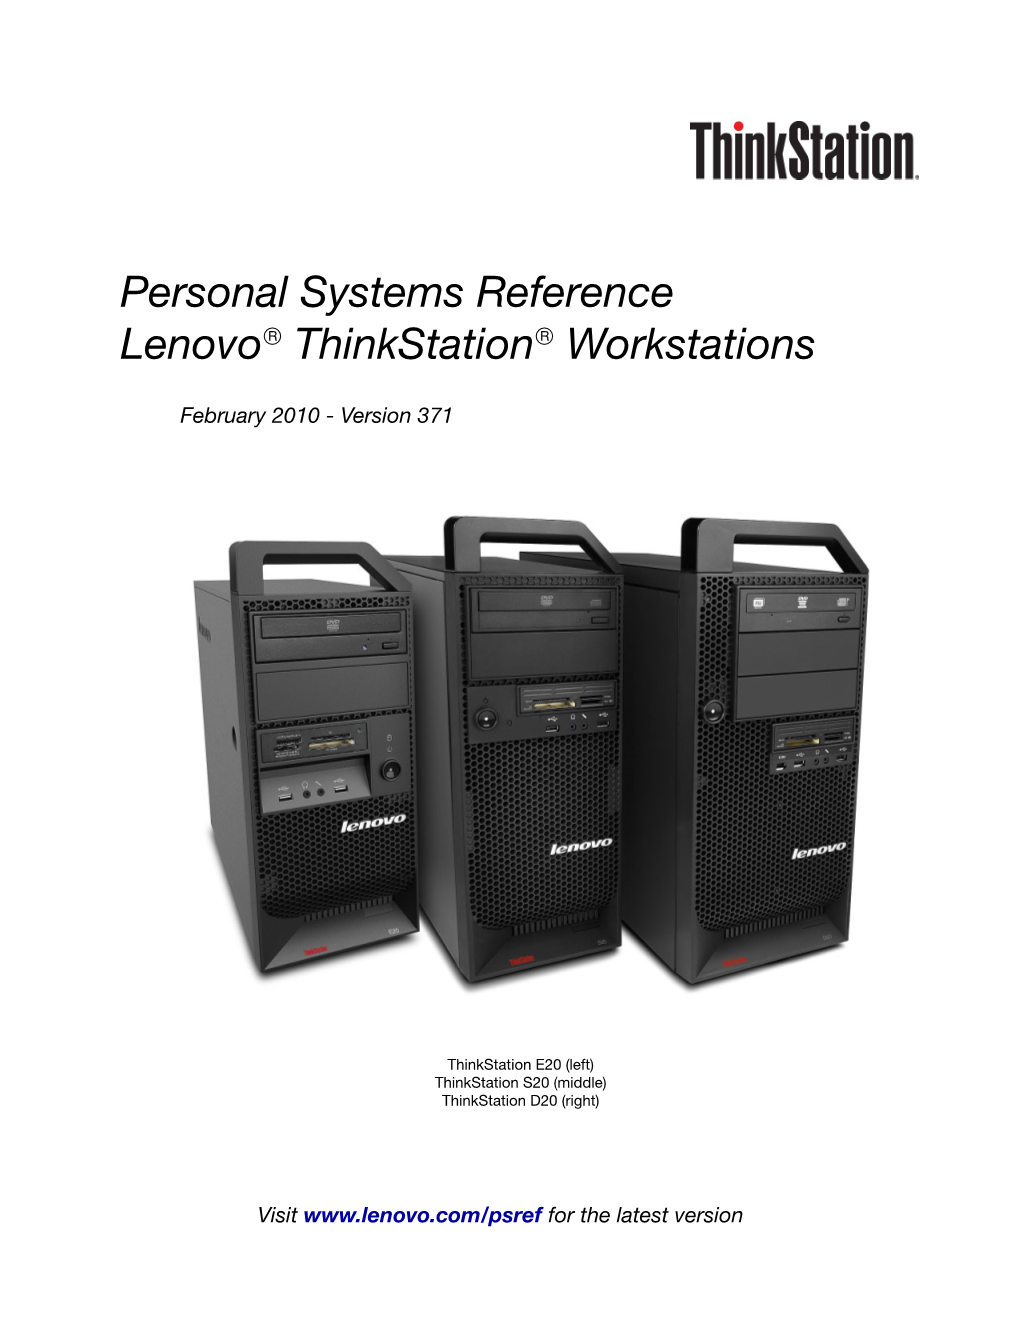 Personal Systems Reference Lenovo Thinkstation Workstations